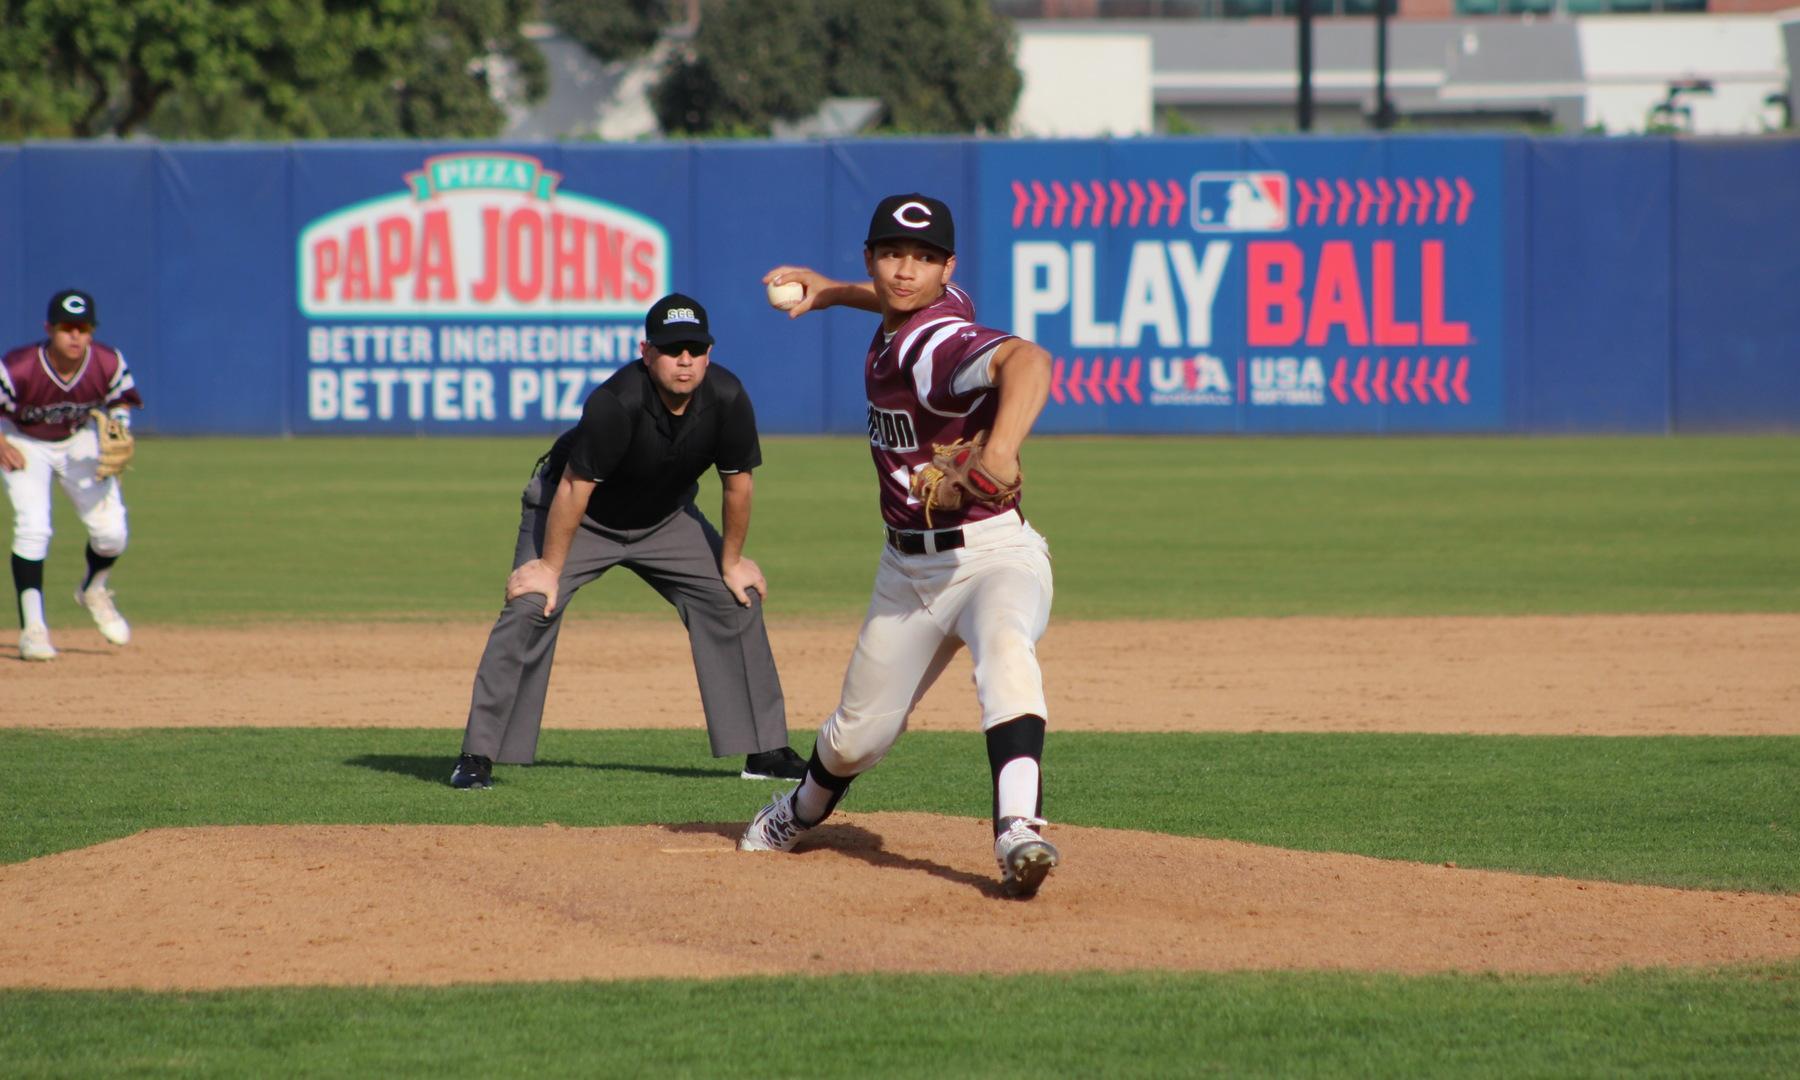 Baseball Caps March with Pair of Wins over West Hills Coalinga